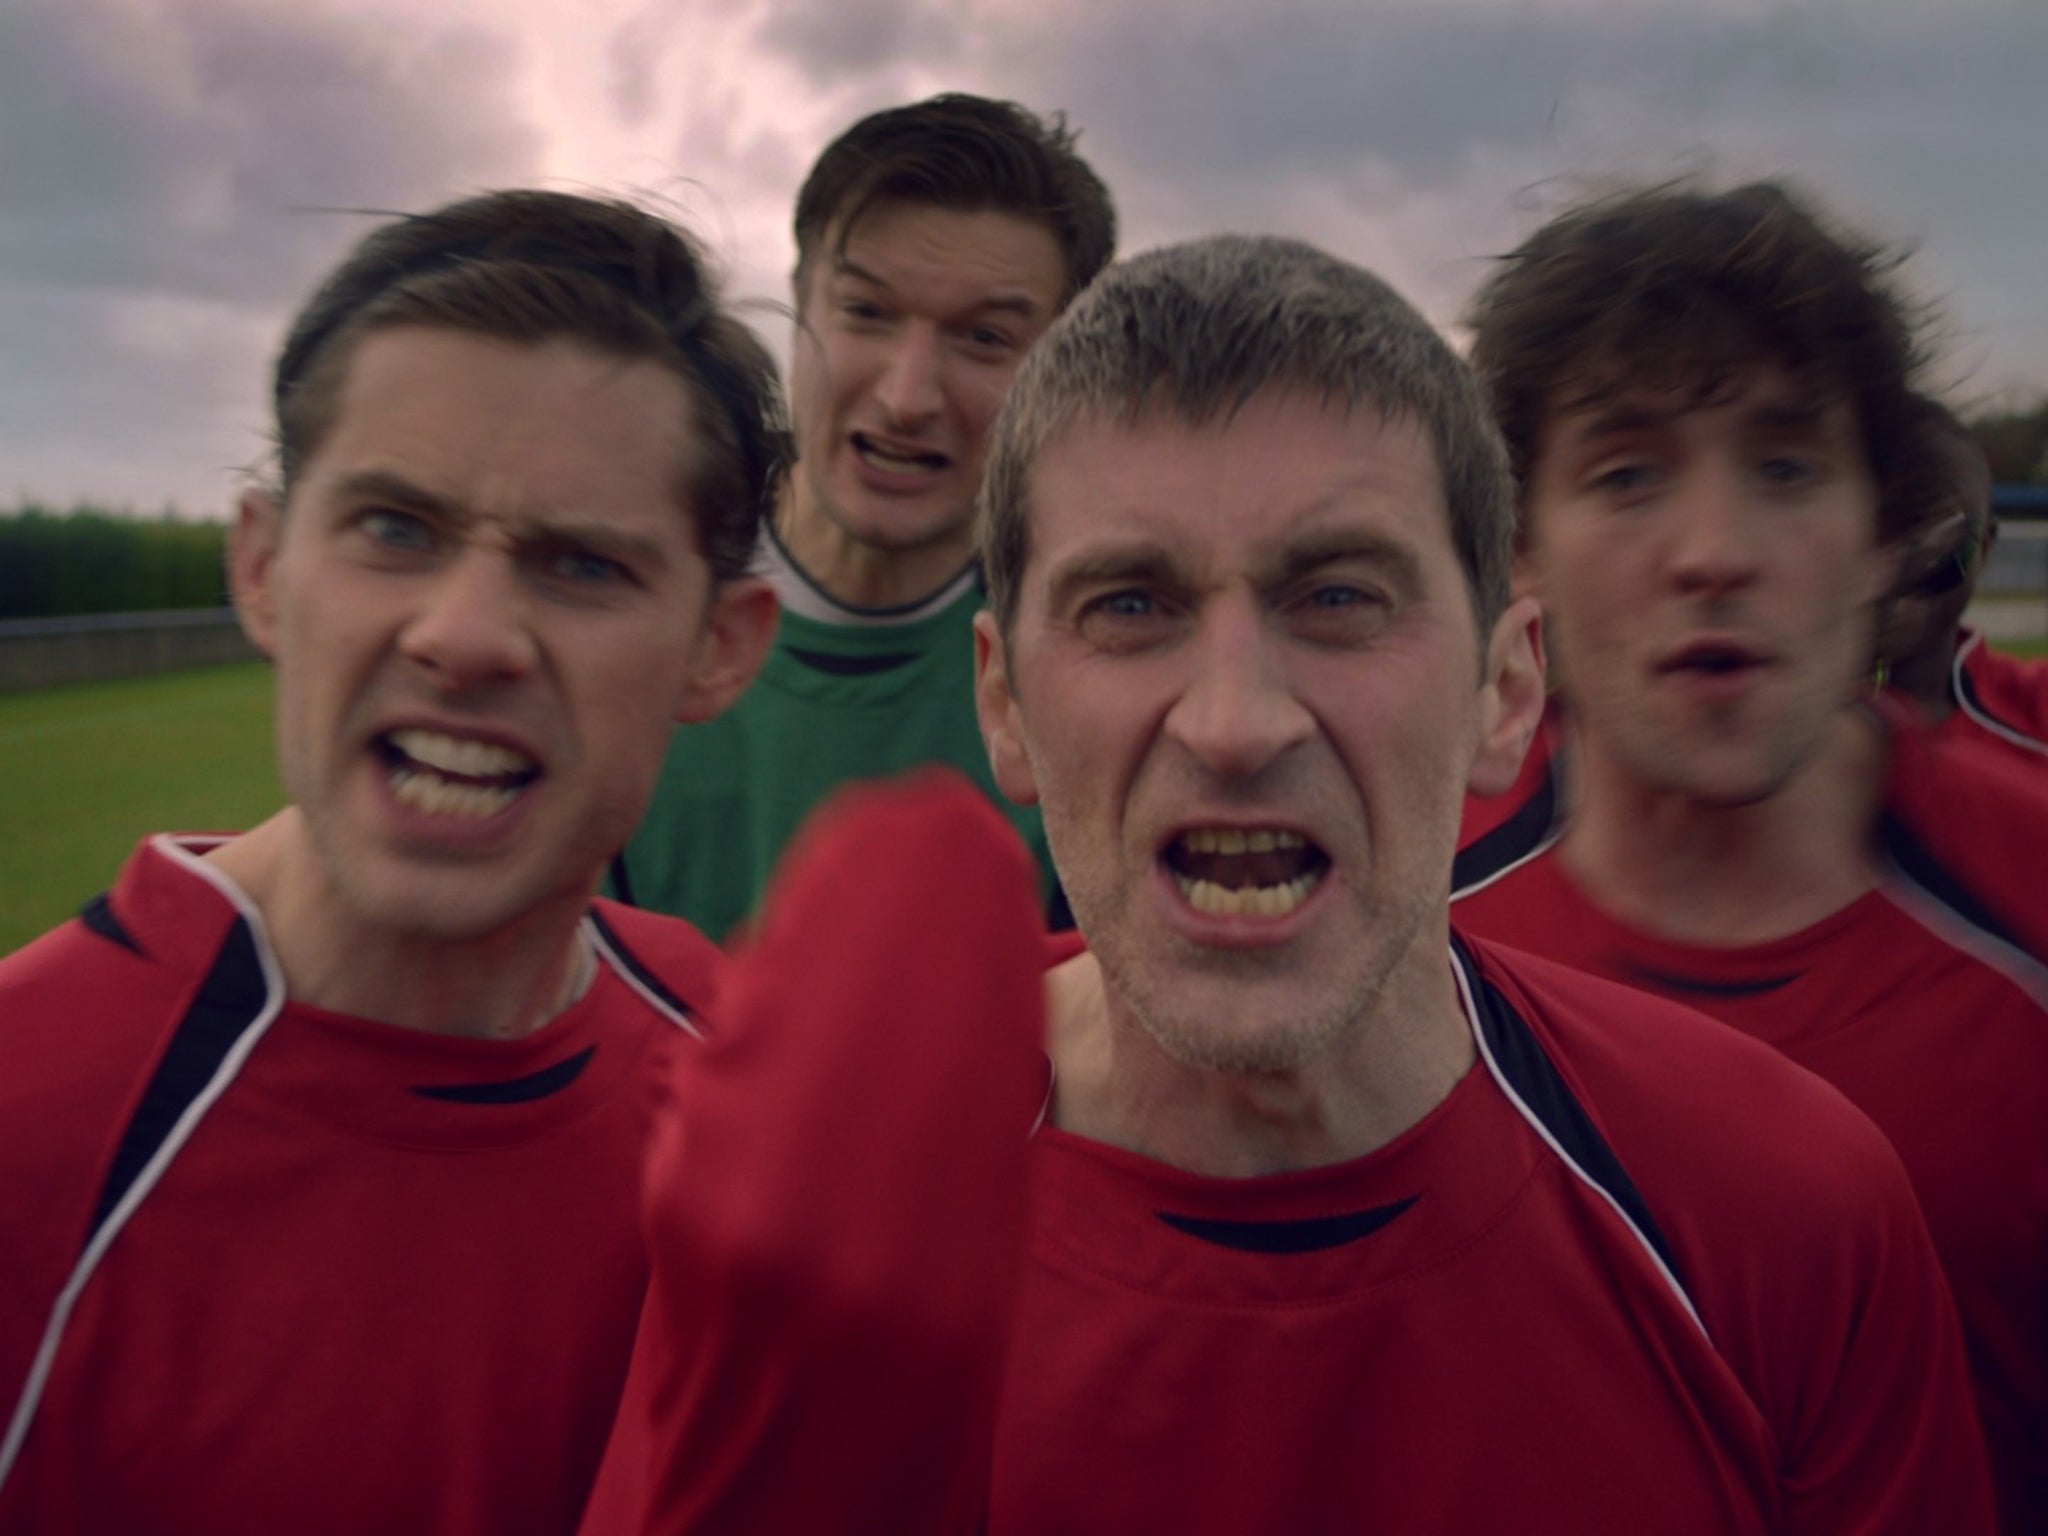 Gary Sinyor’s Spinal Tap-ish spoof 'We are United'